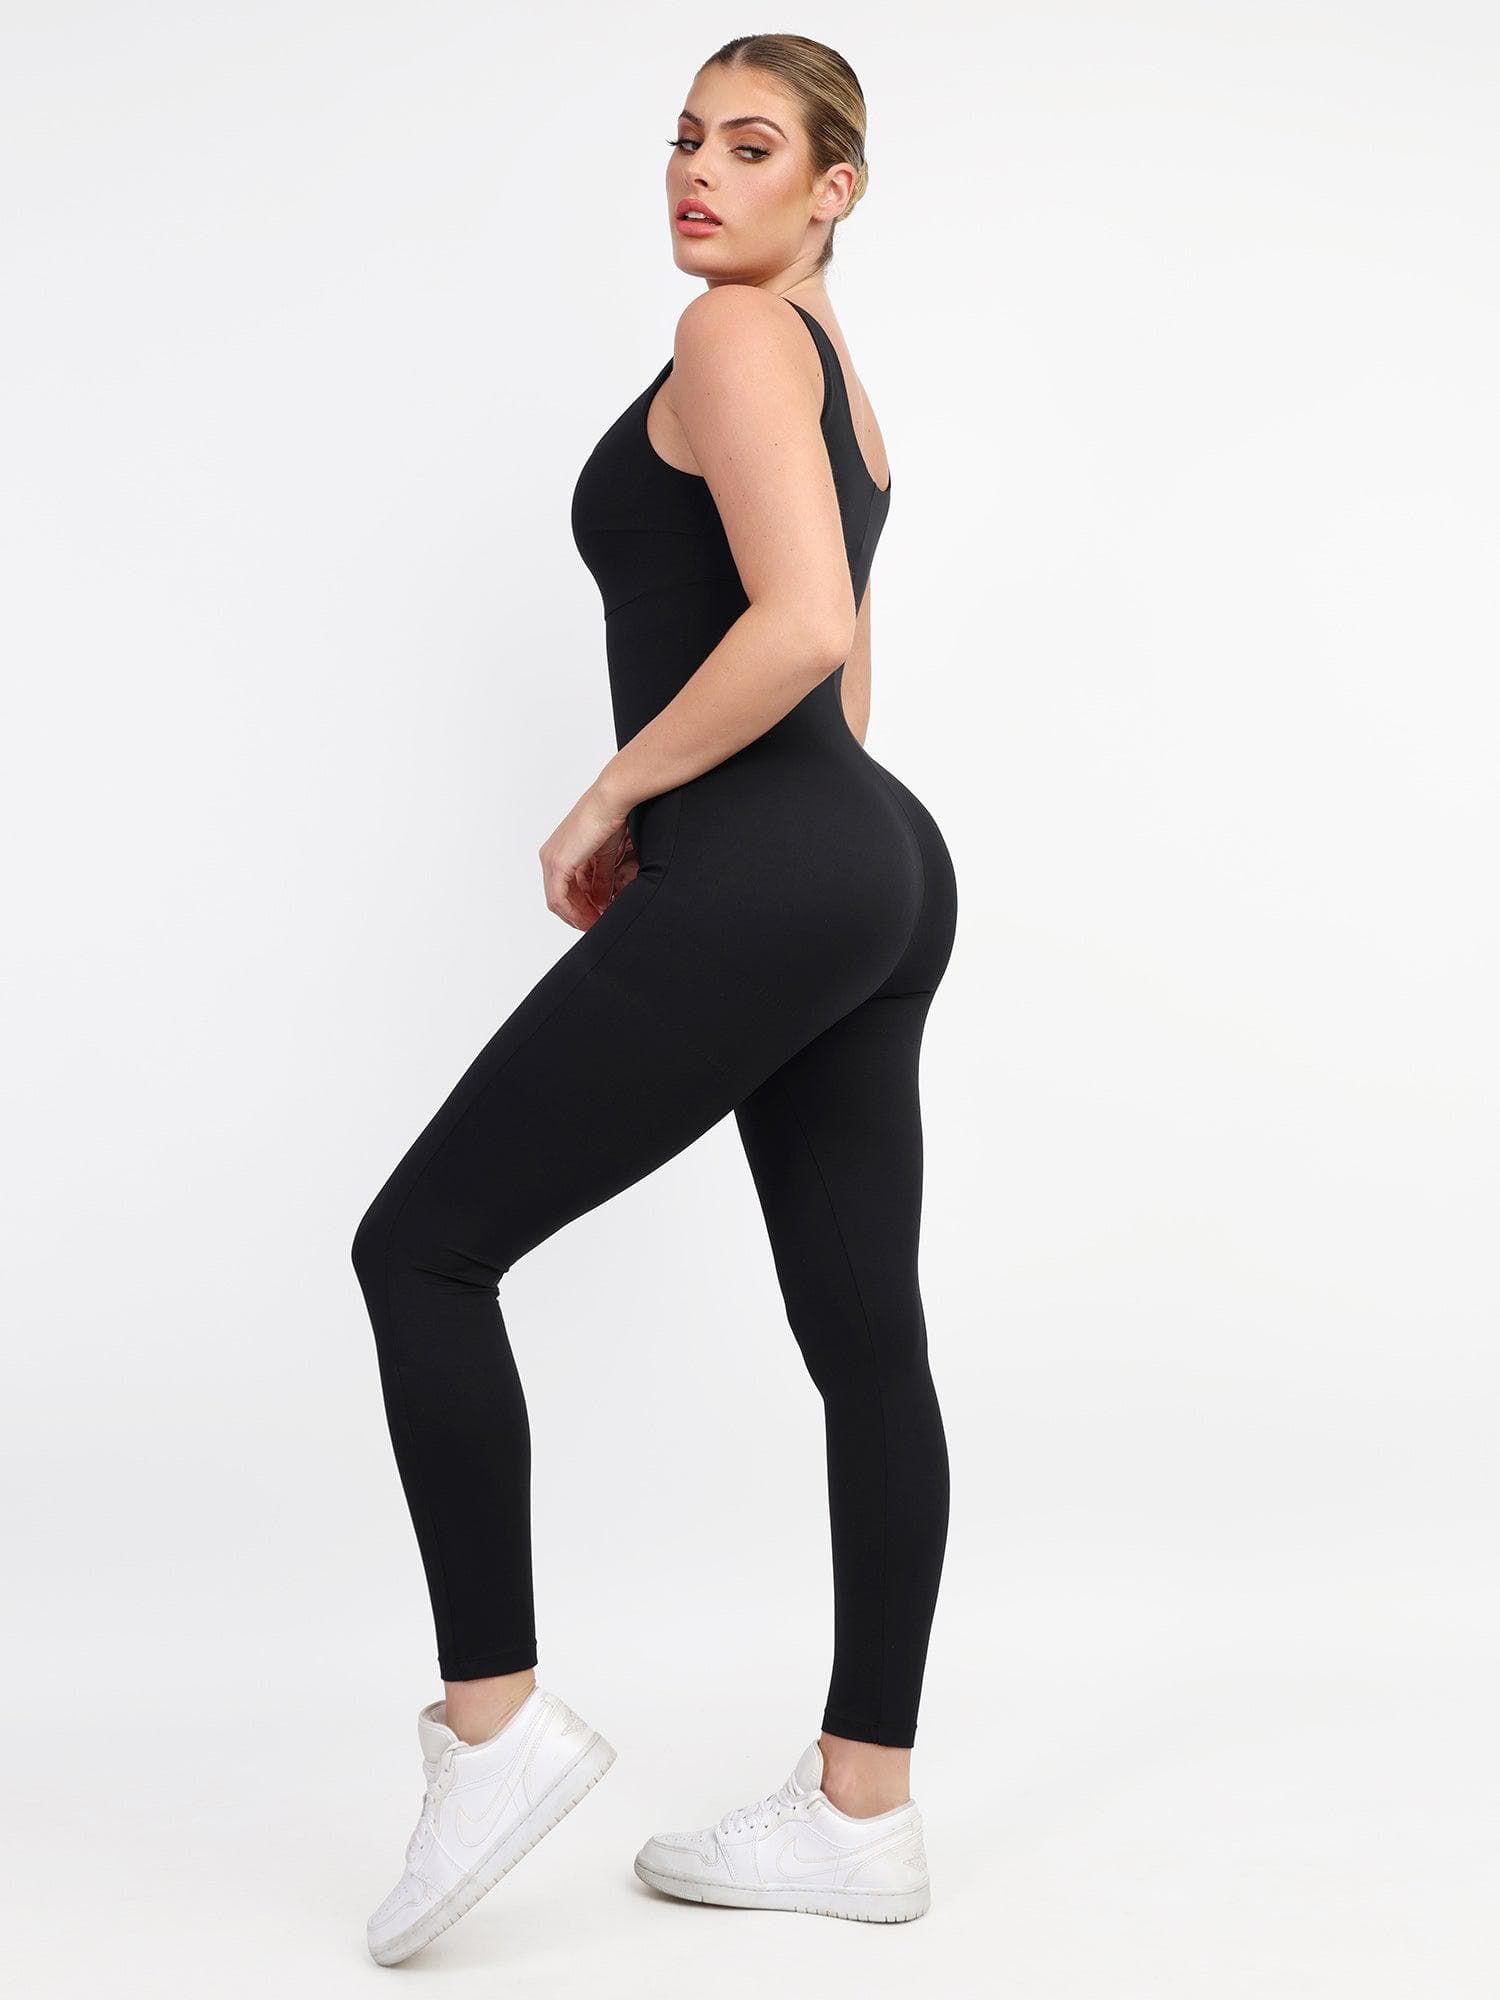 Stracoo One-Piece Tank Top Thigh Slimming Jumpsuit"